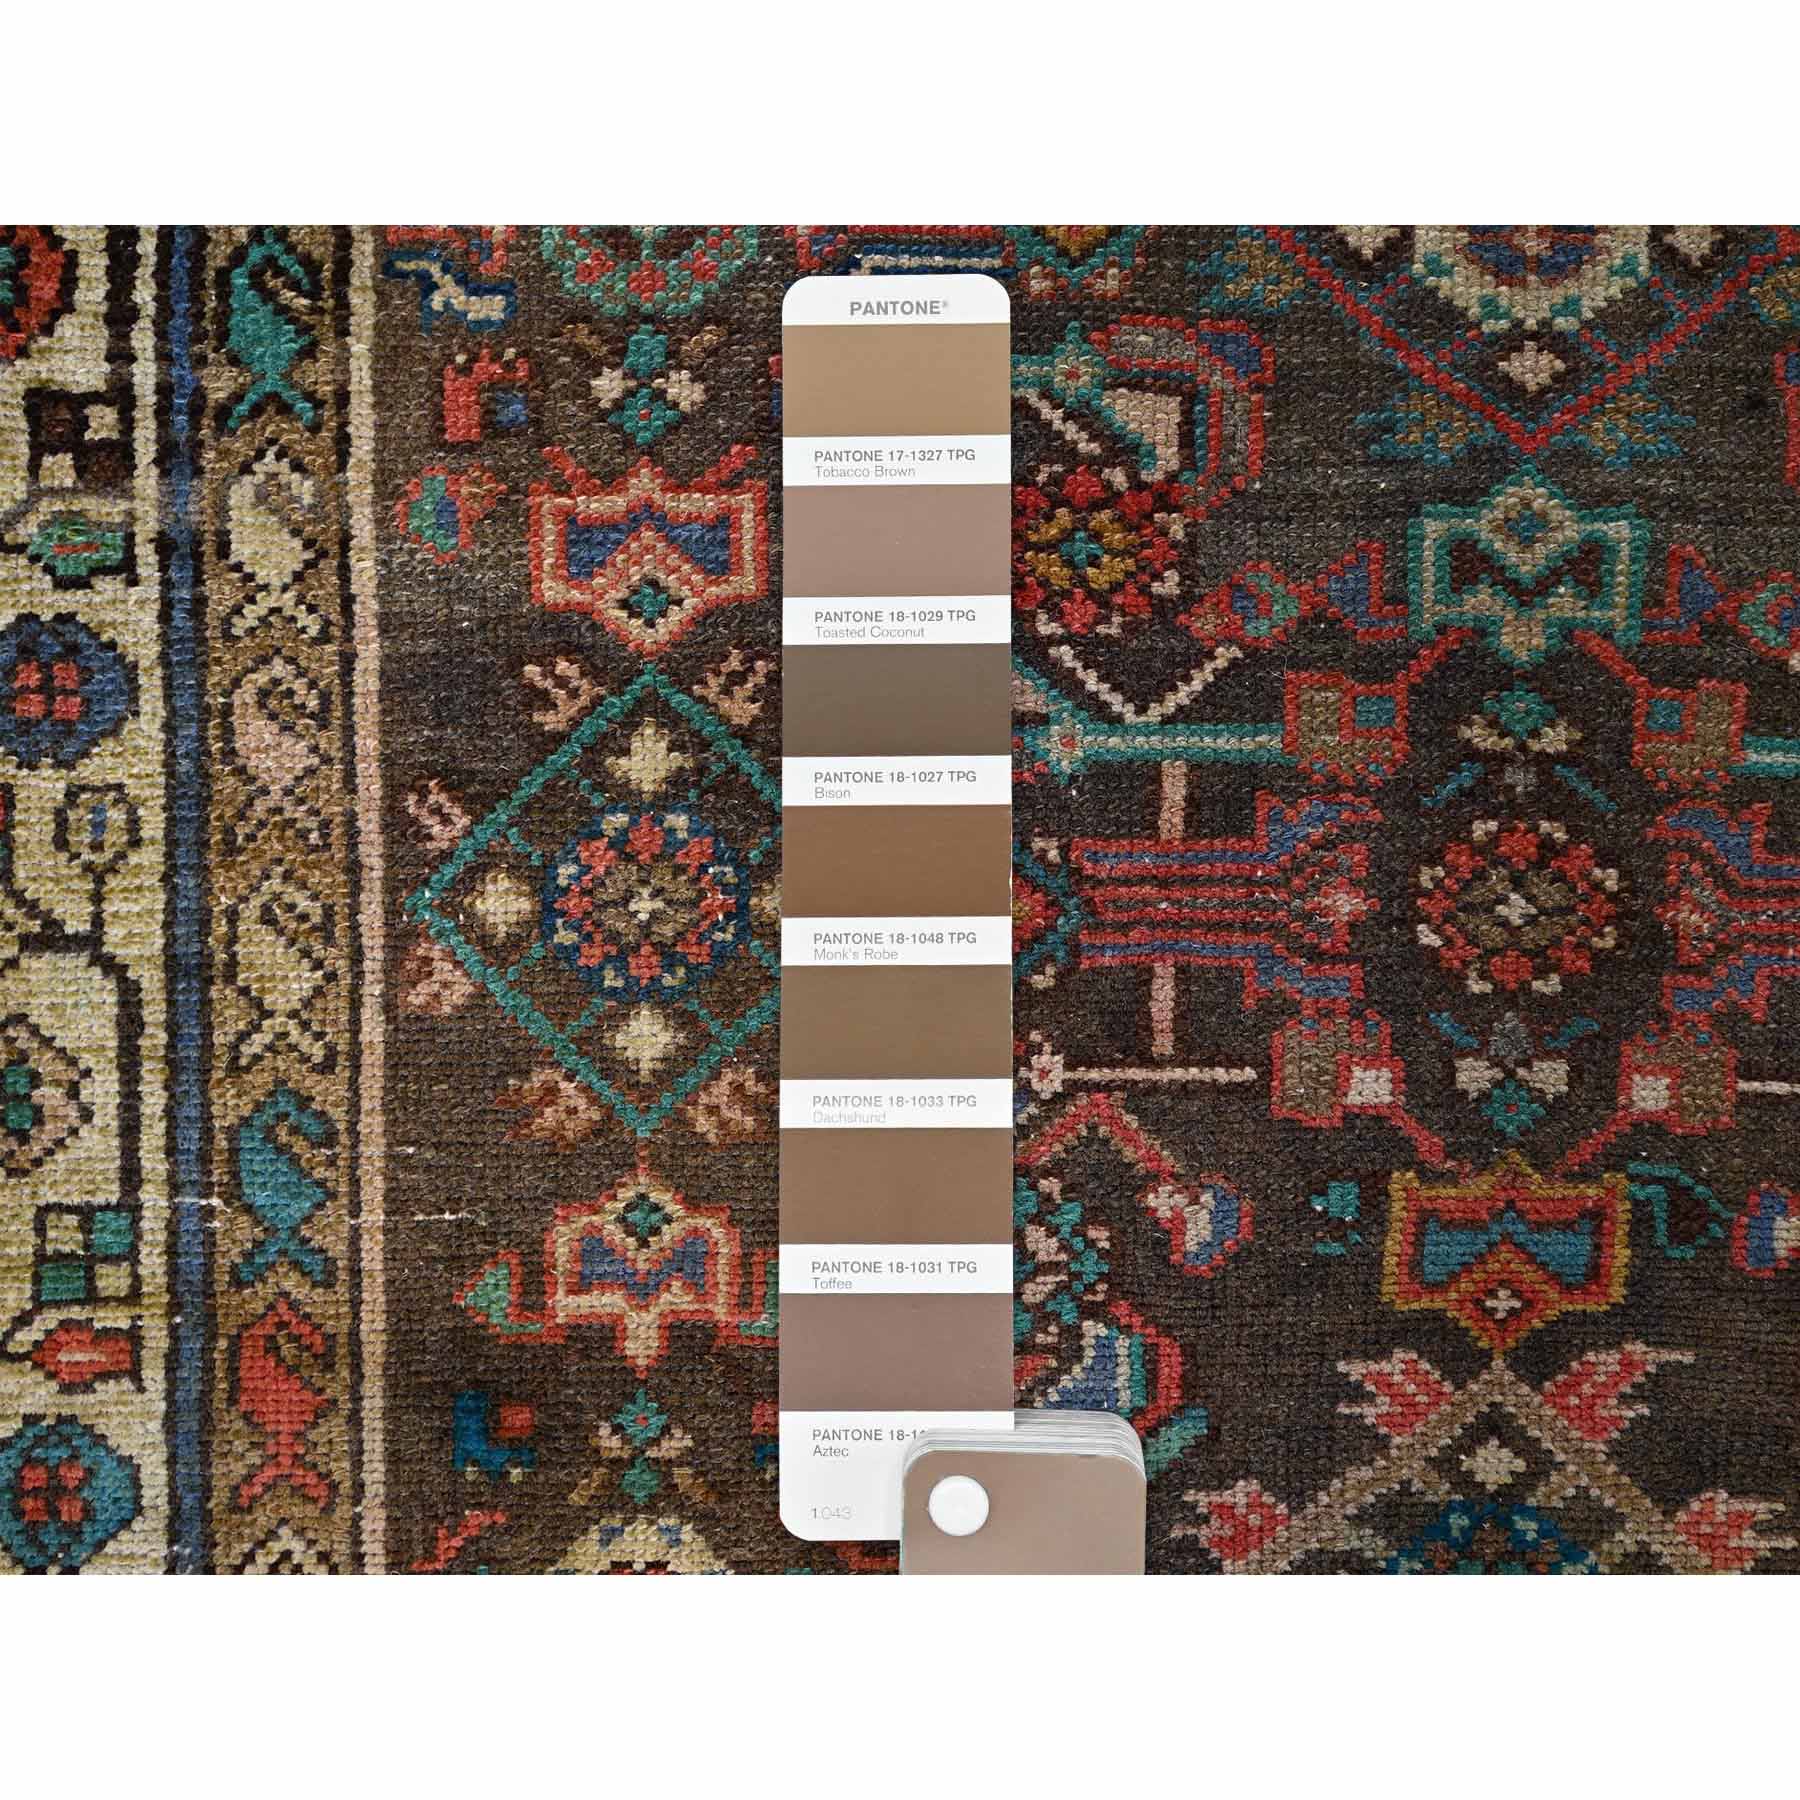 Overdyed-Vintage-Hand-Knotted-Rug-429925